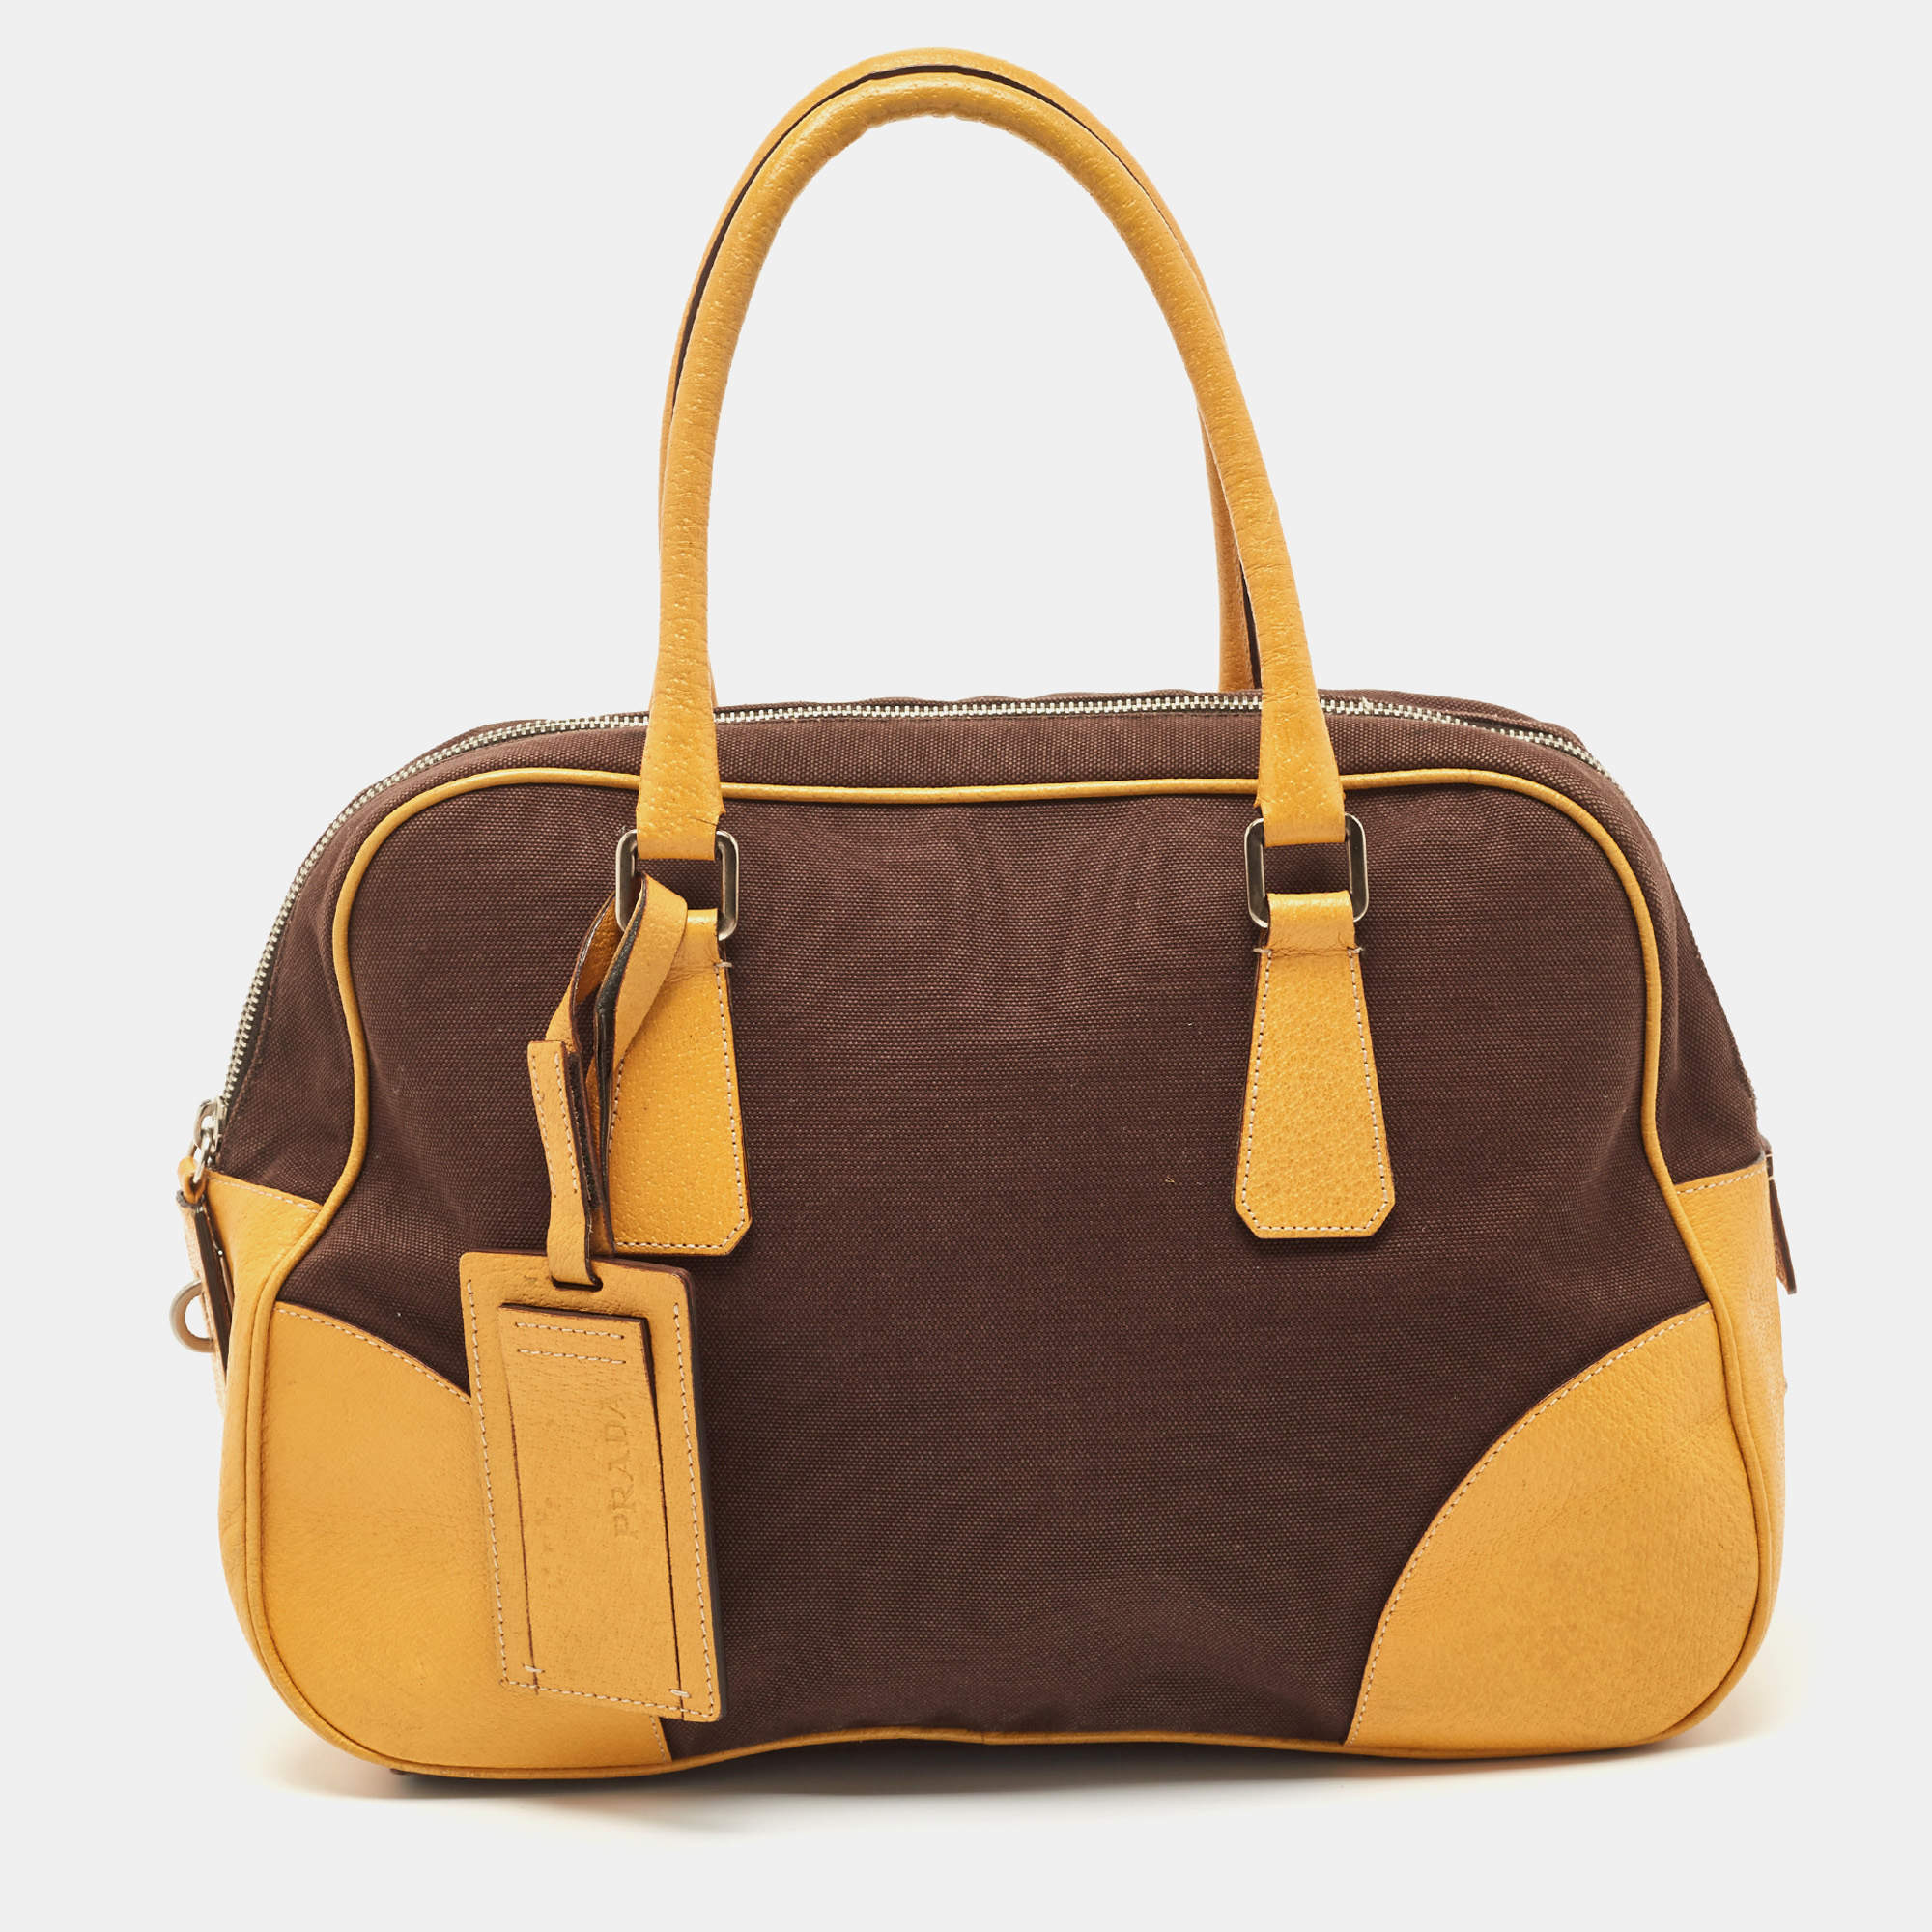 Prada Bauletto Leather Bowling Bag In Gold